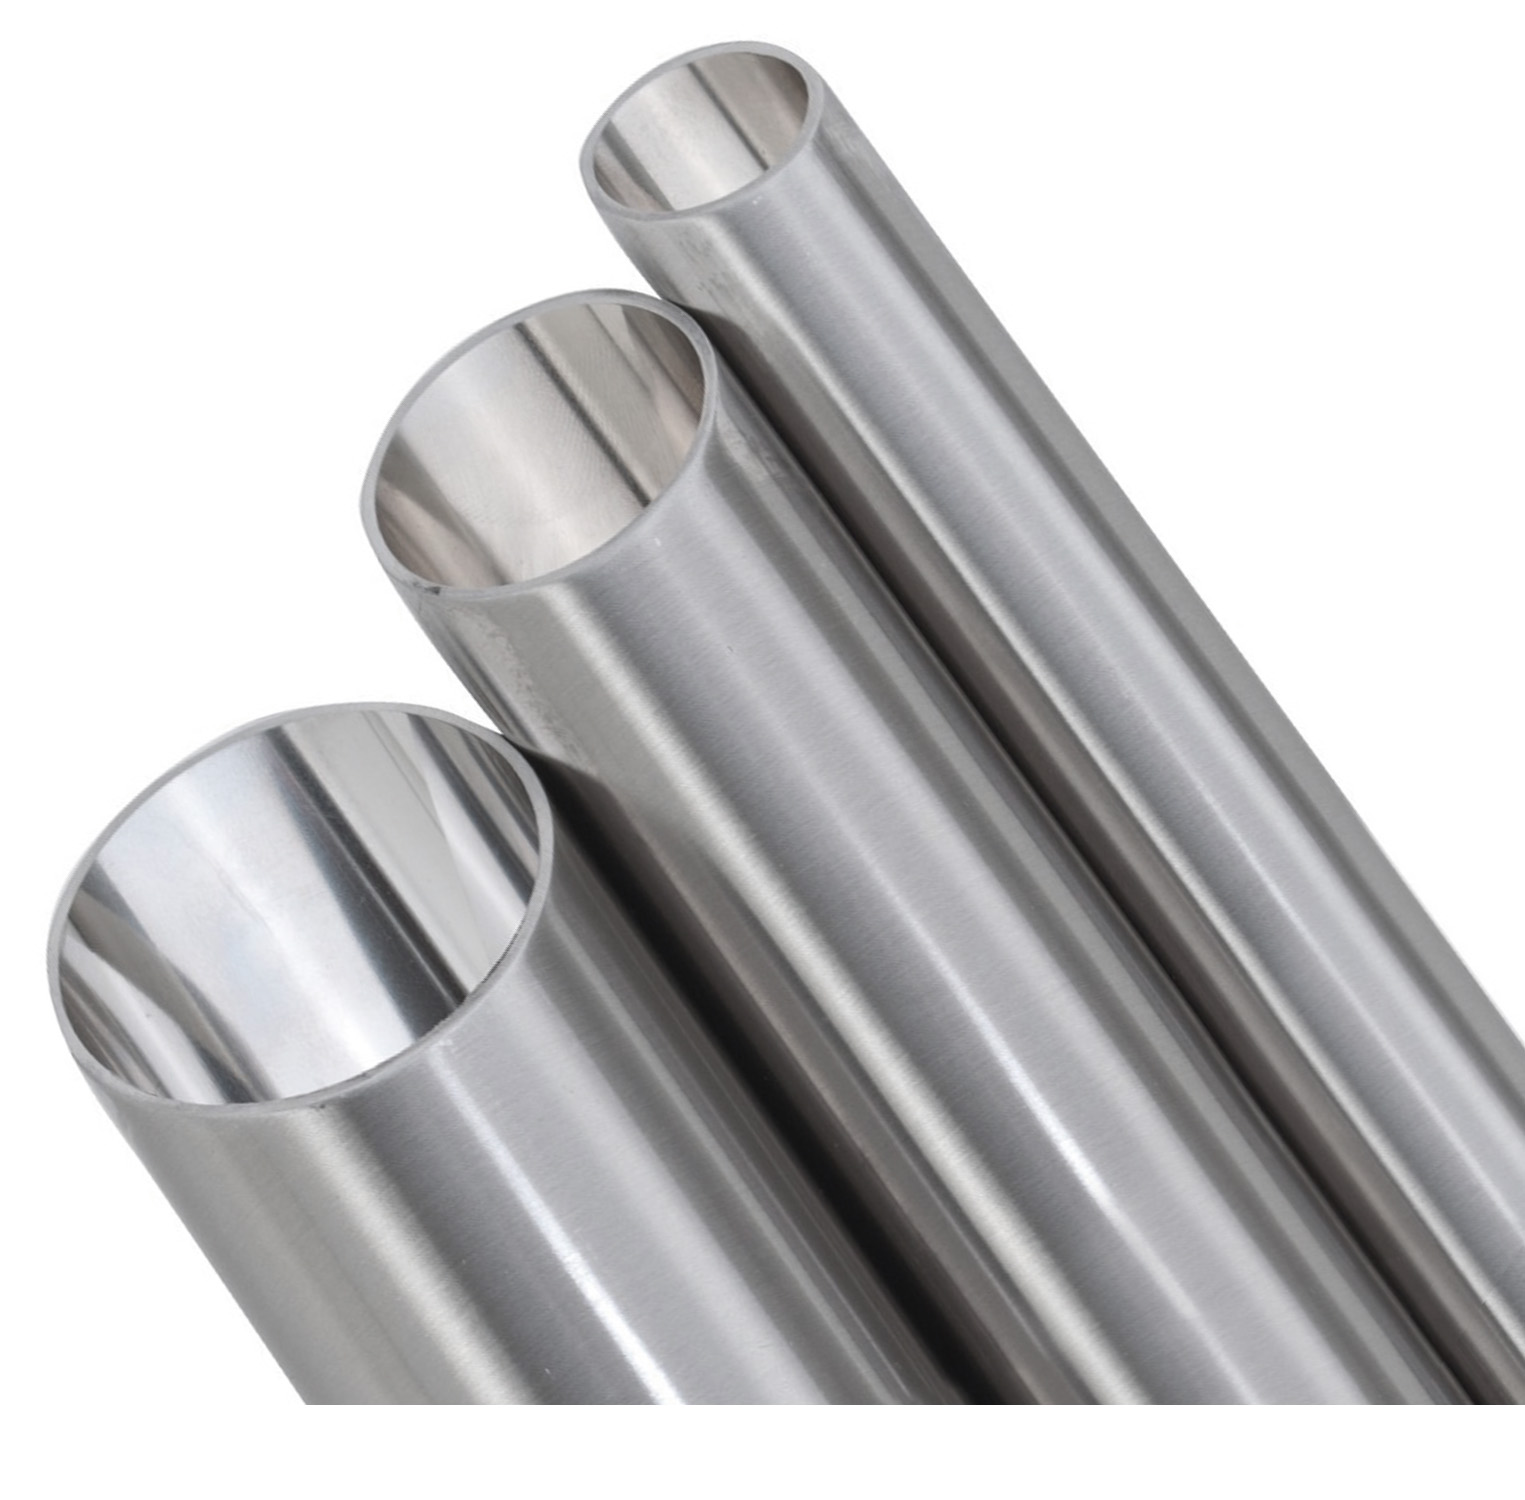 4"x48" Flow Sanitary HIGH GRADE Stainless STEEL 304 PIPE HFS LENGTH 48" R 